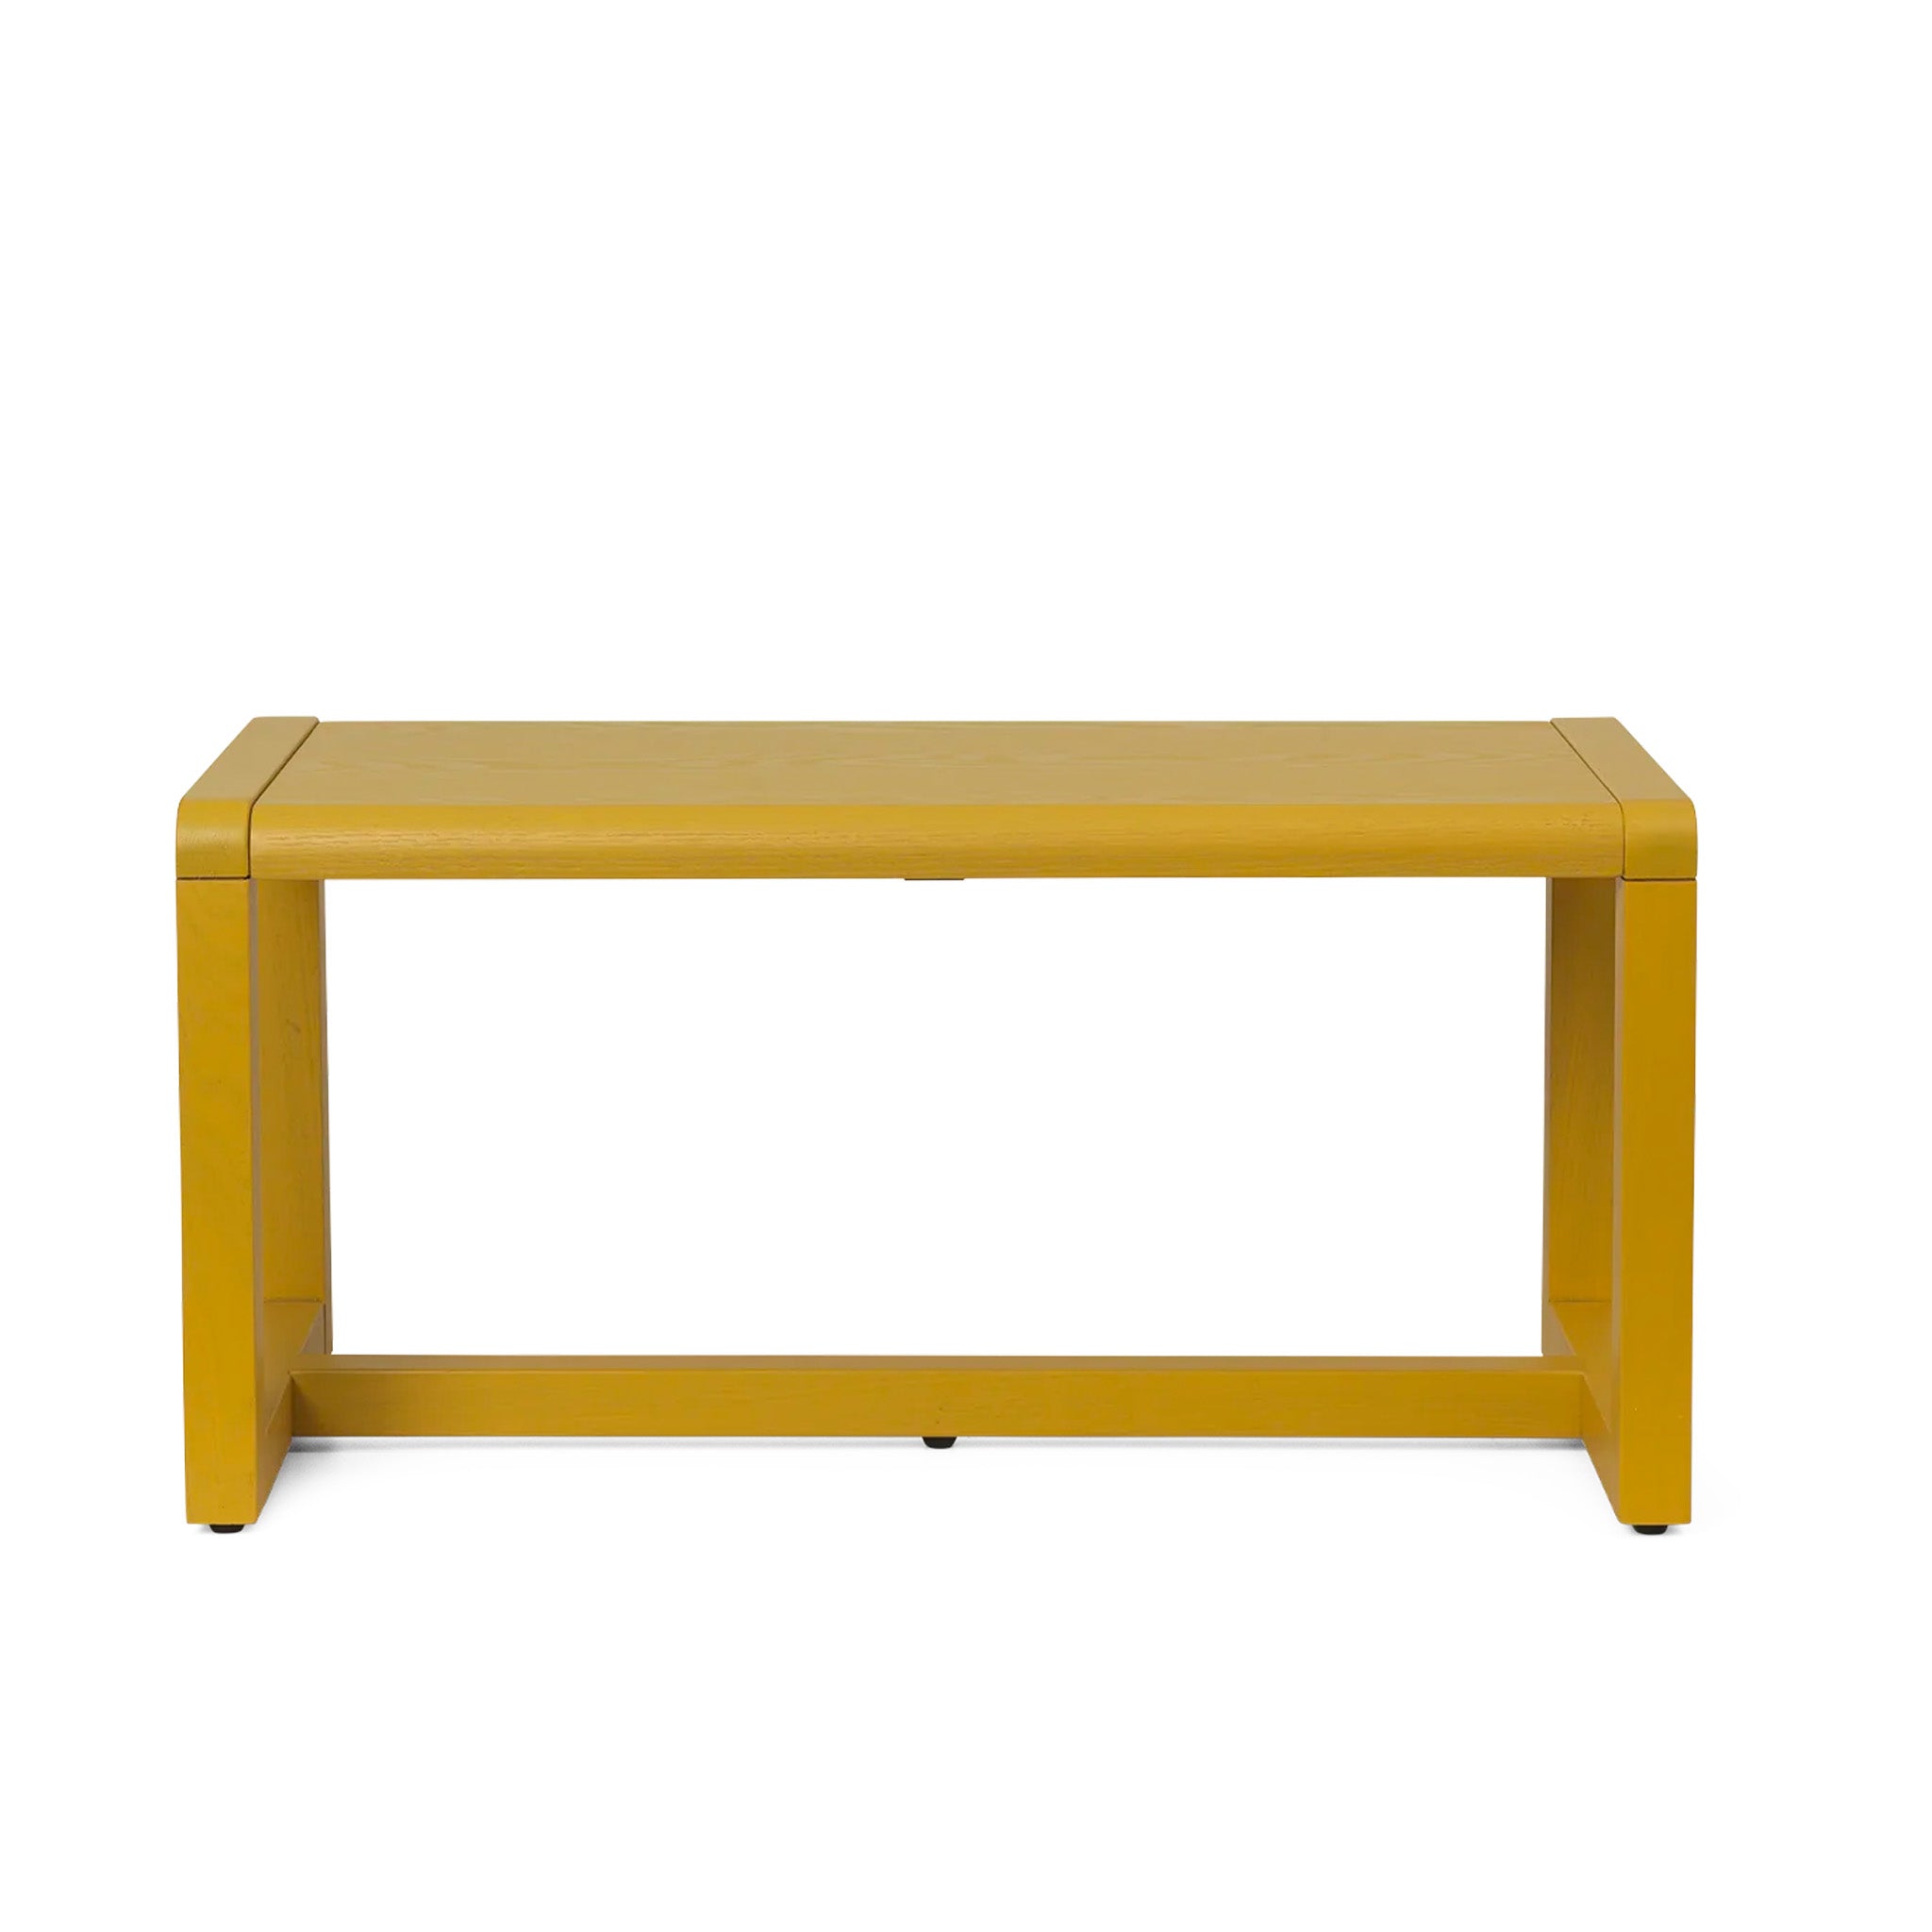 Little Architect Bench by Ferm Living